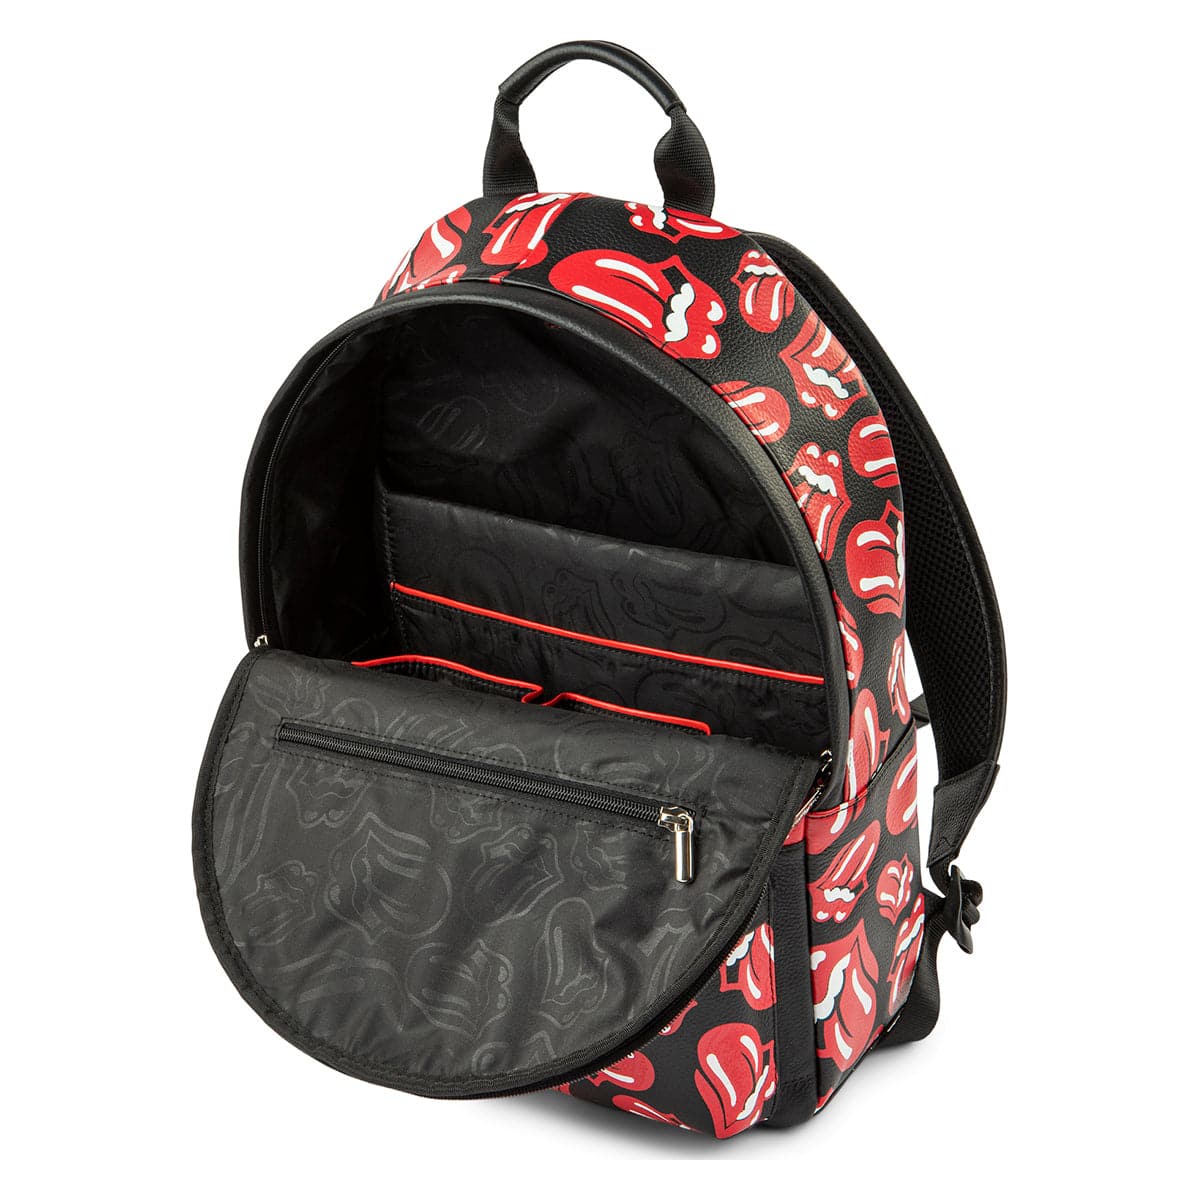 The Rolling Stones The Watts Backpack